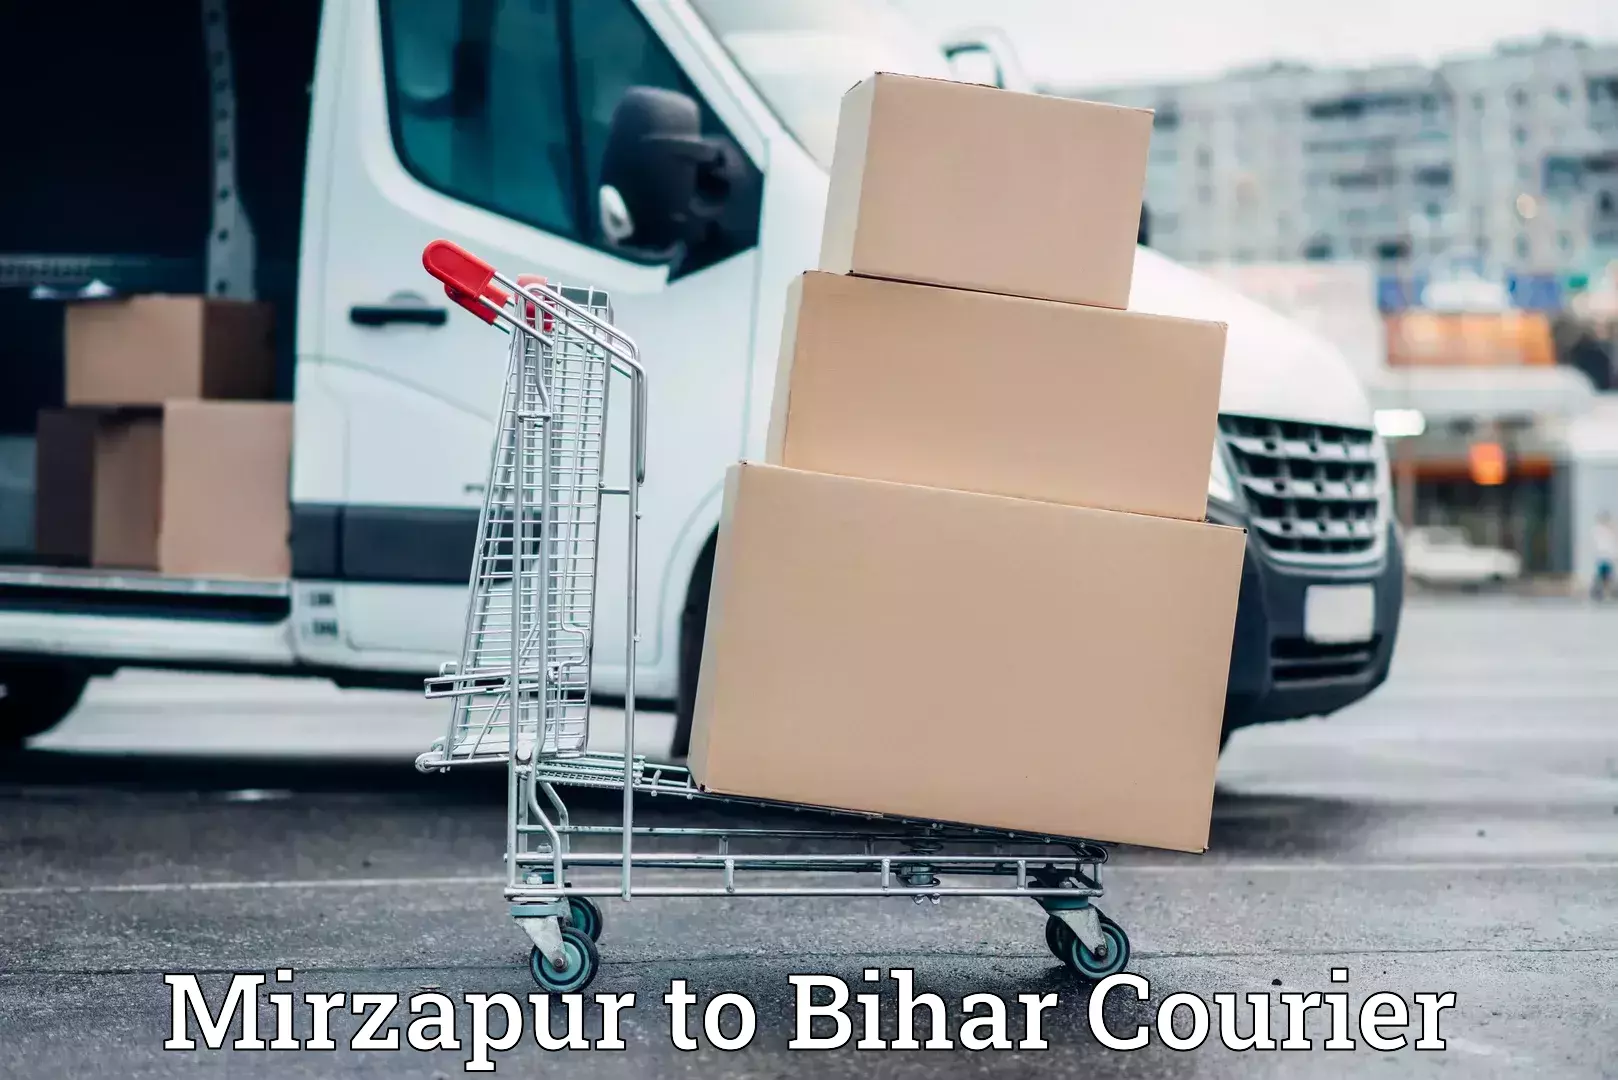 Trusted relocation experts Mirzapur to Bihar